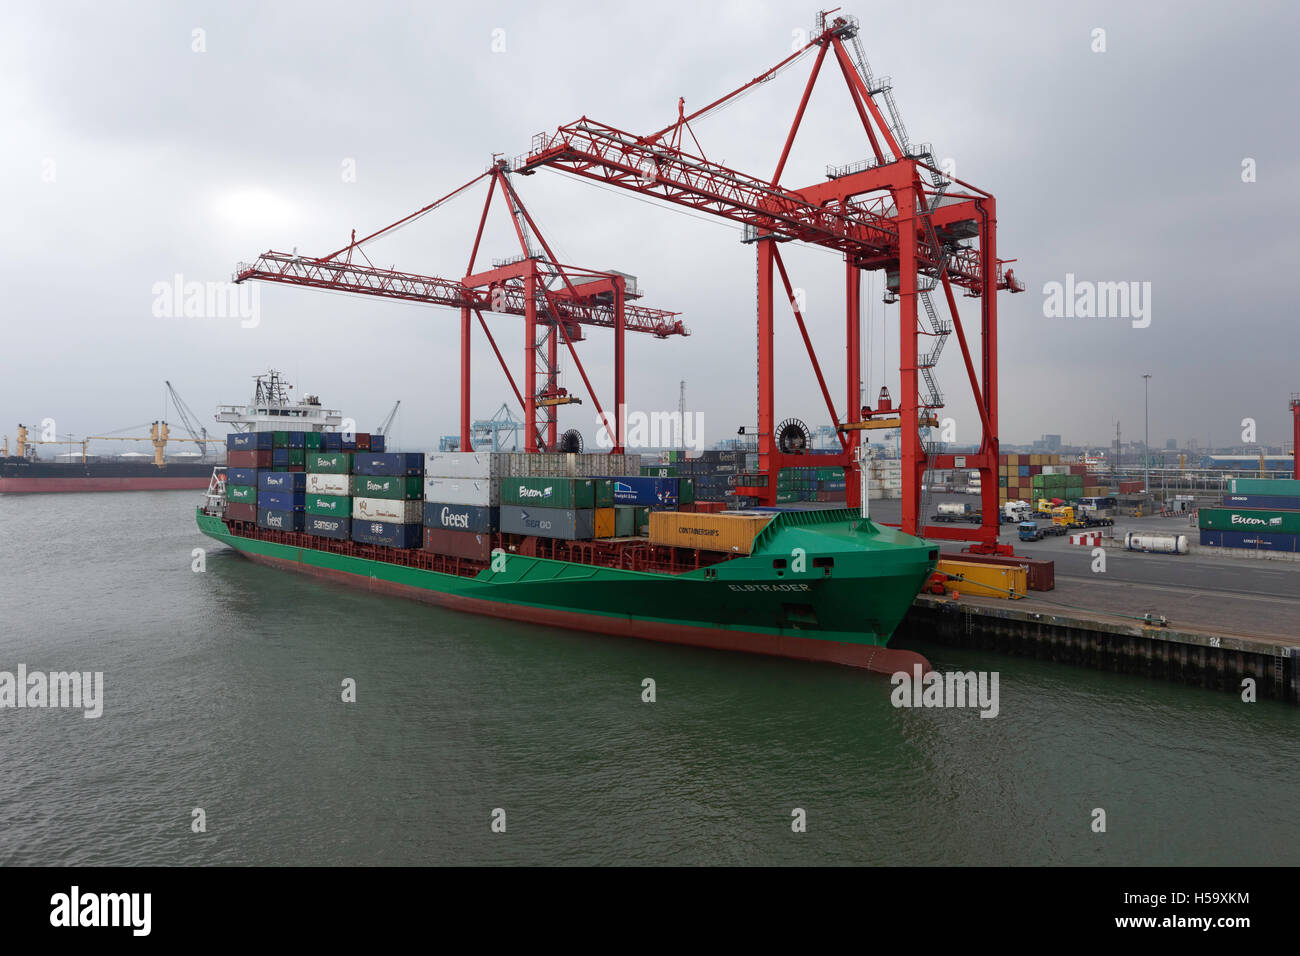 Industrial landscape image of a container ship being loaded at Port of Dublin,Ireland. Stock Photo